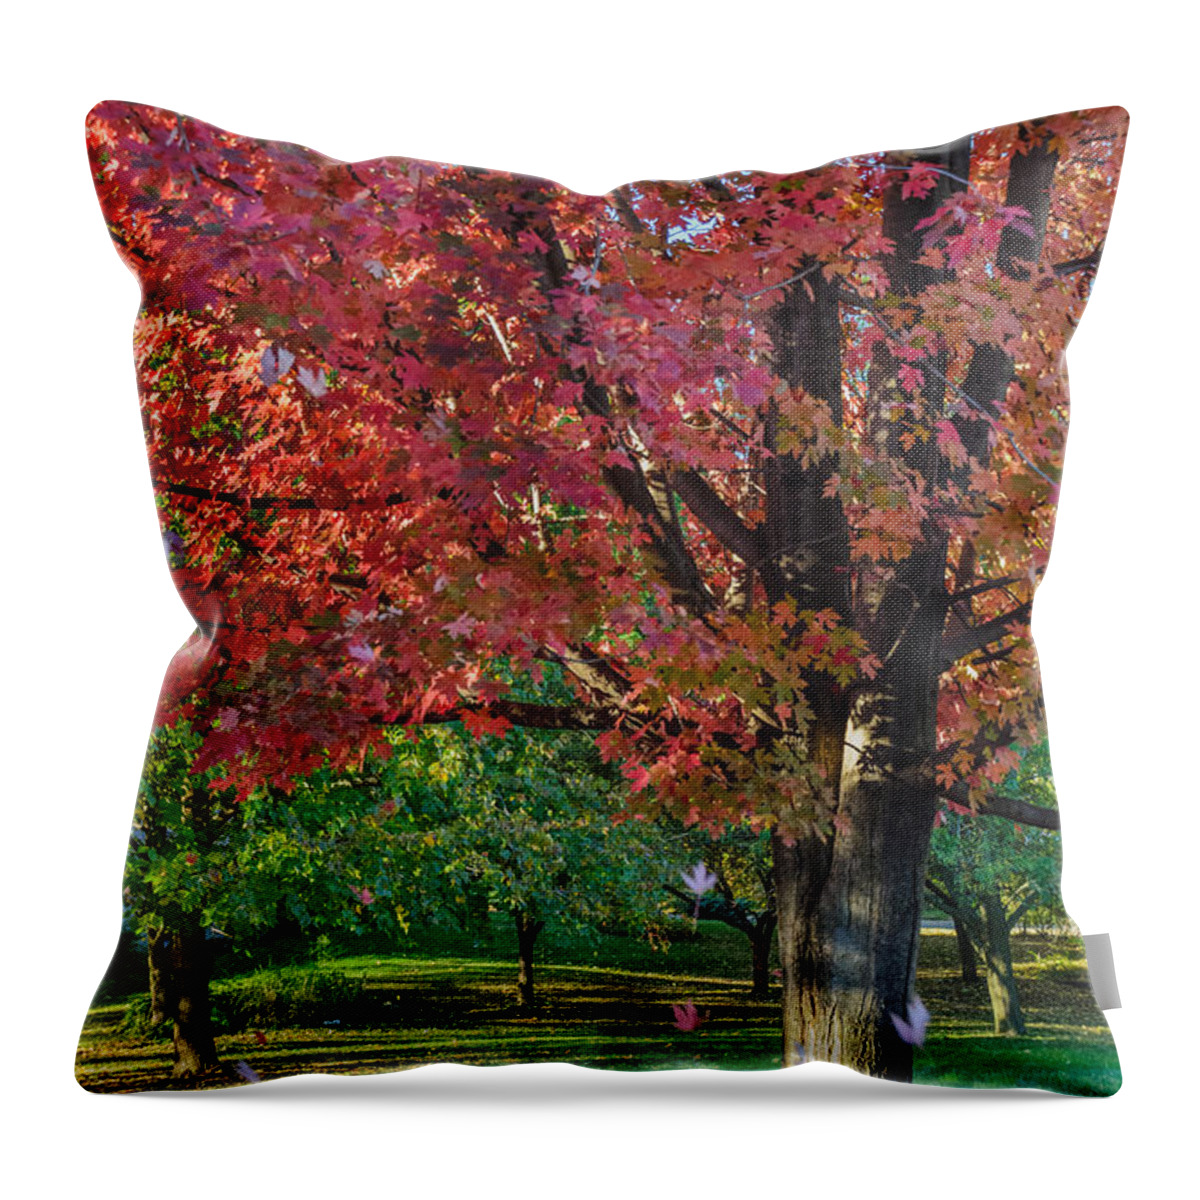 Red Maple Tree Throw Pillow featuring the photograph Autumn Blaze Red Maple Tree by Tamara Becker